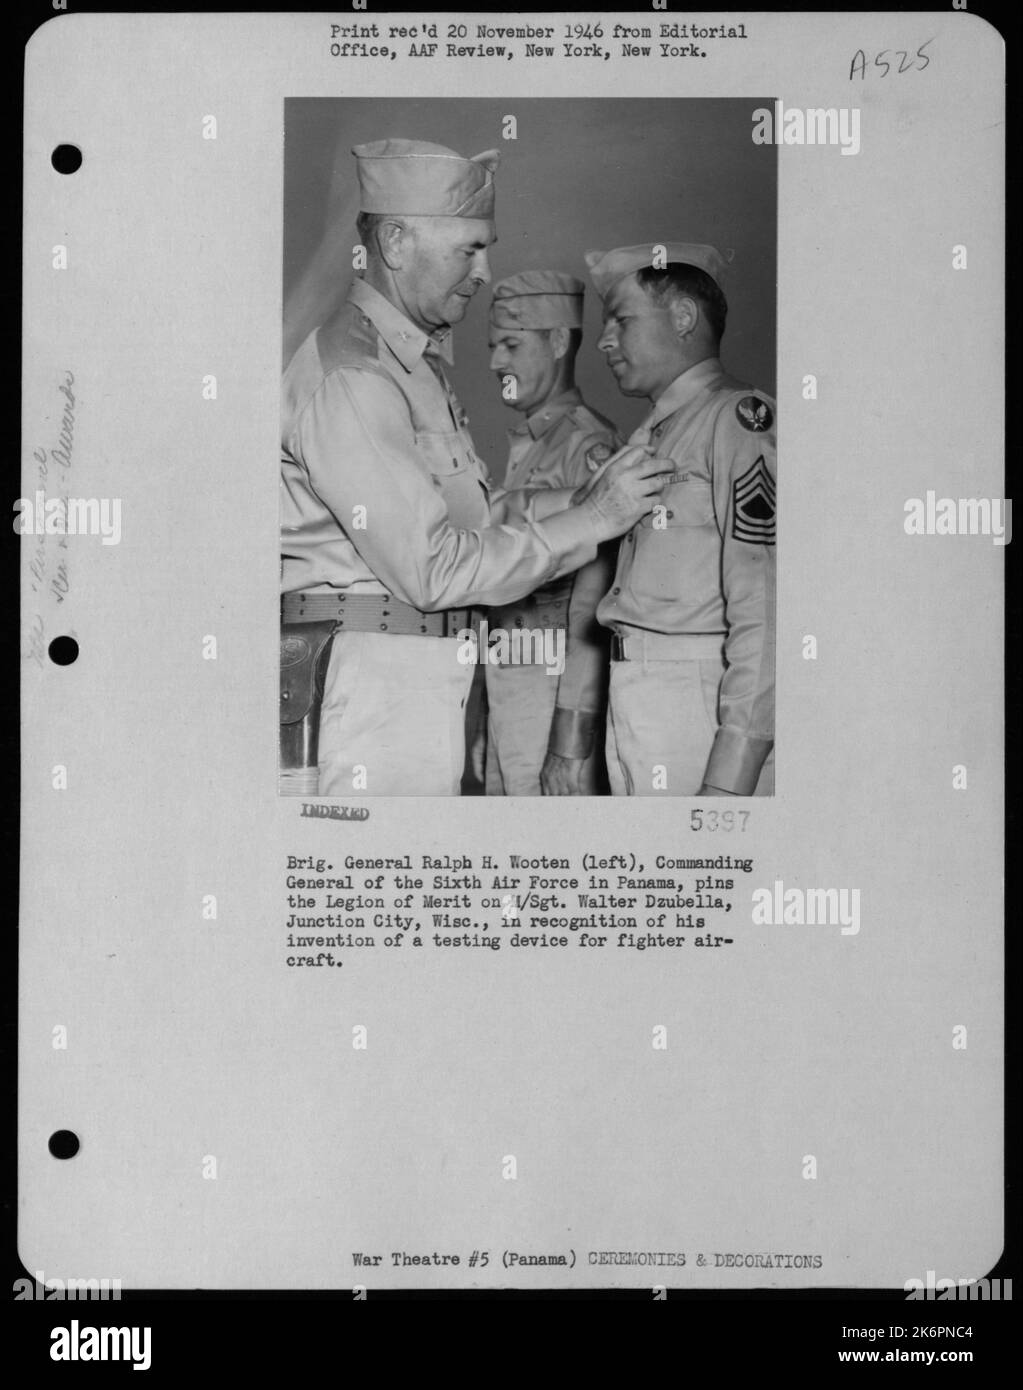 Brig. General Ralph H. Wooten (Left), Commanding General Of The Sixth Air Force In Panama, Pins The Legion Of Merit On M/Sgt. Walter Dzubella, Junction City, Wisc., In Recognition Of His Invention Of A Testing Device For Fighter Aircraft. Stock Photo